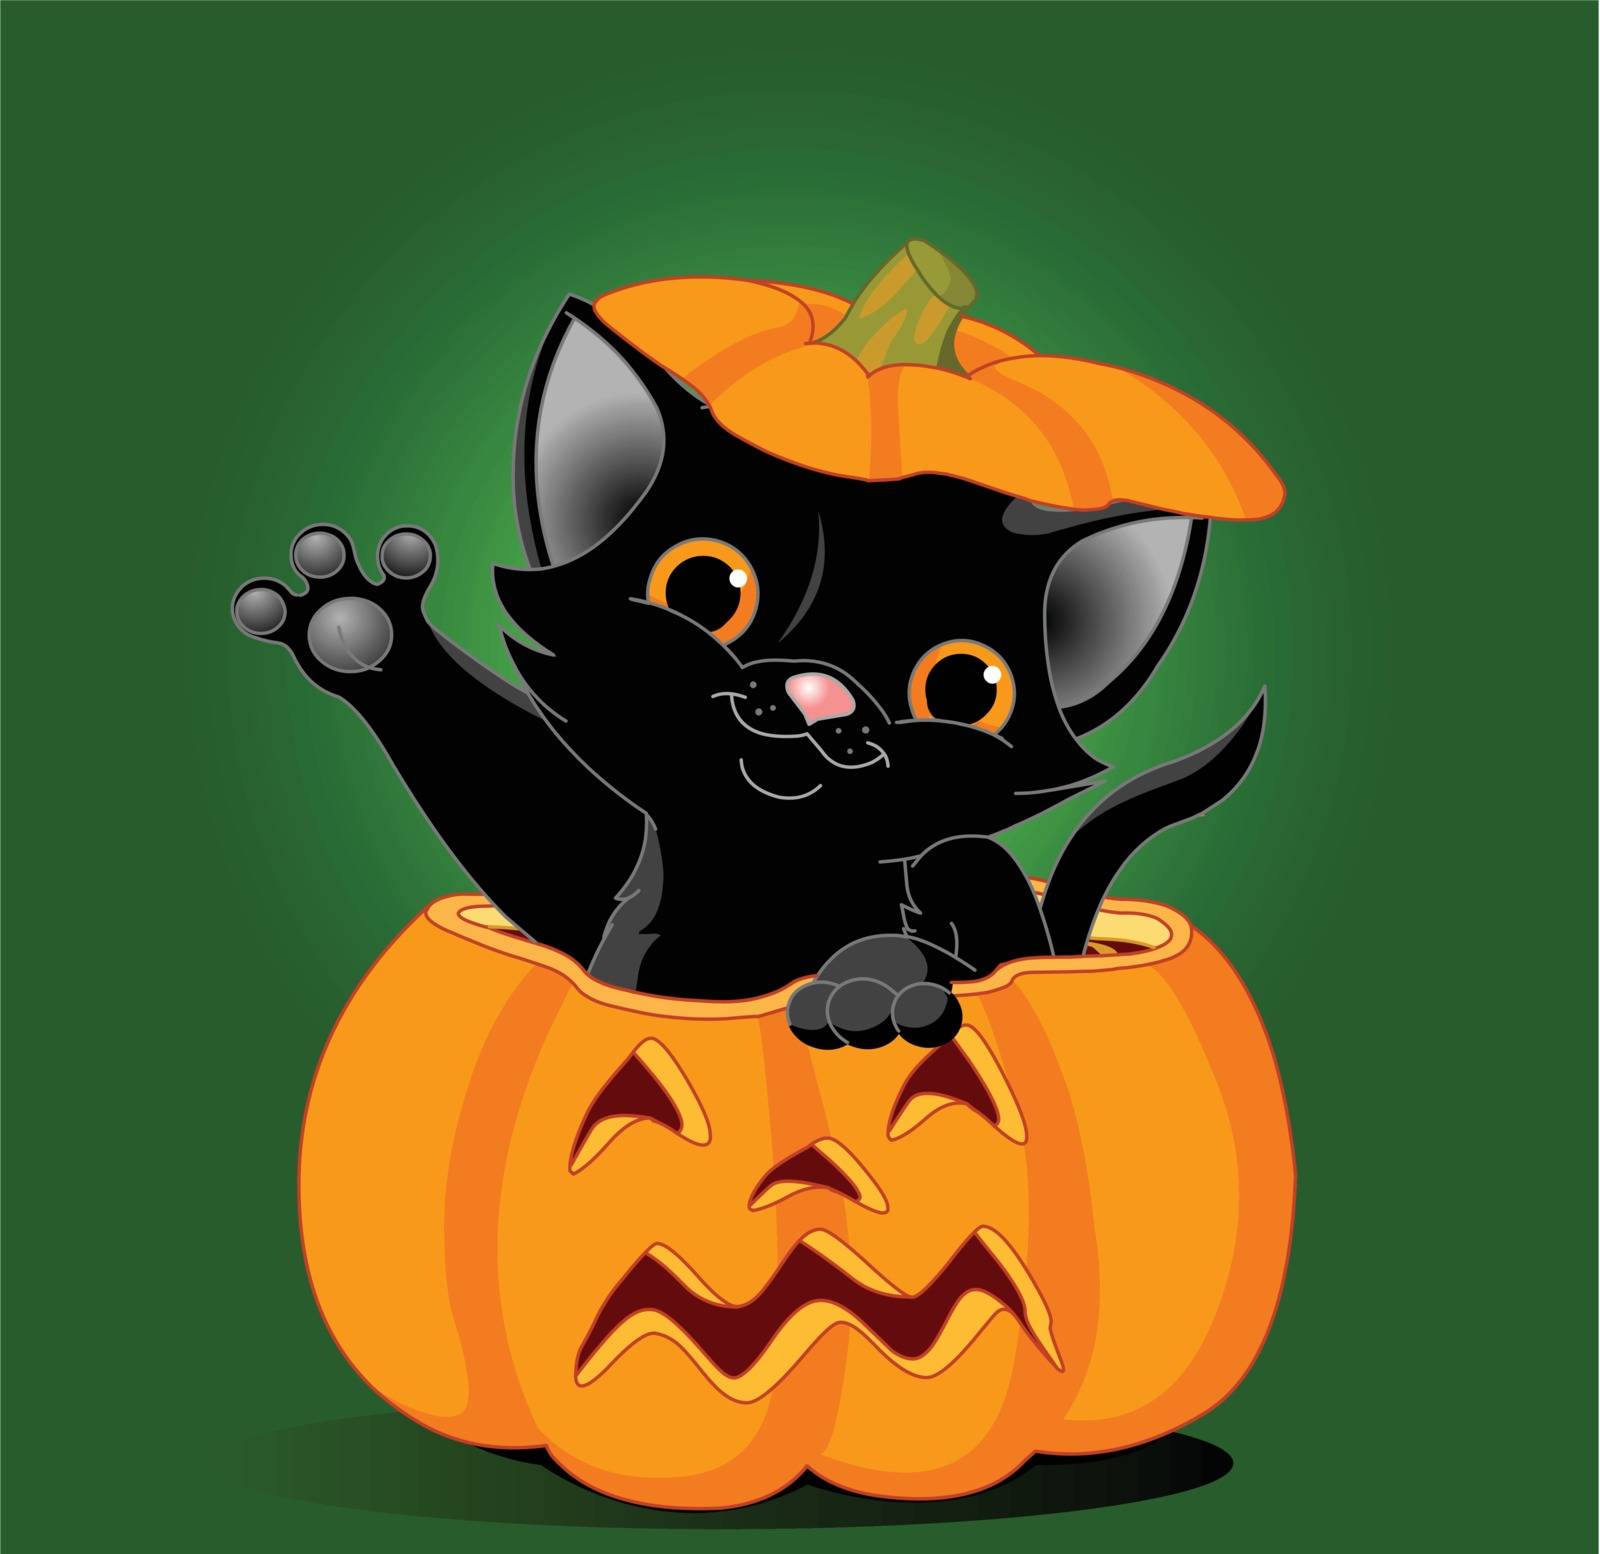 Black kitten is jumping out of a Halloween pumpkin. Background is separate